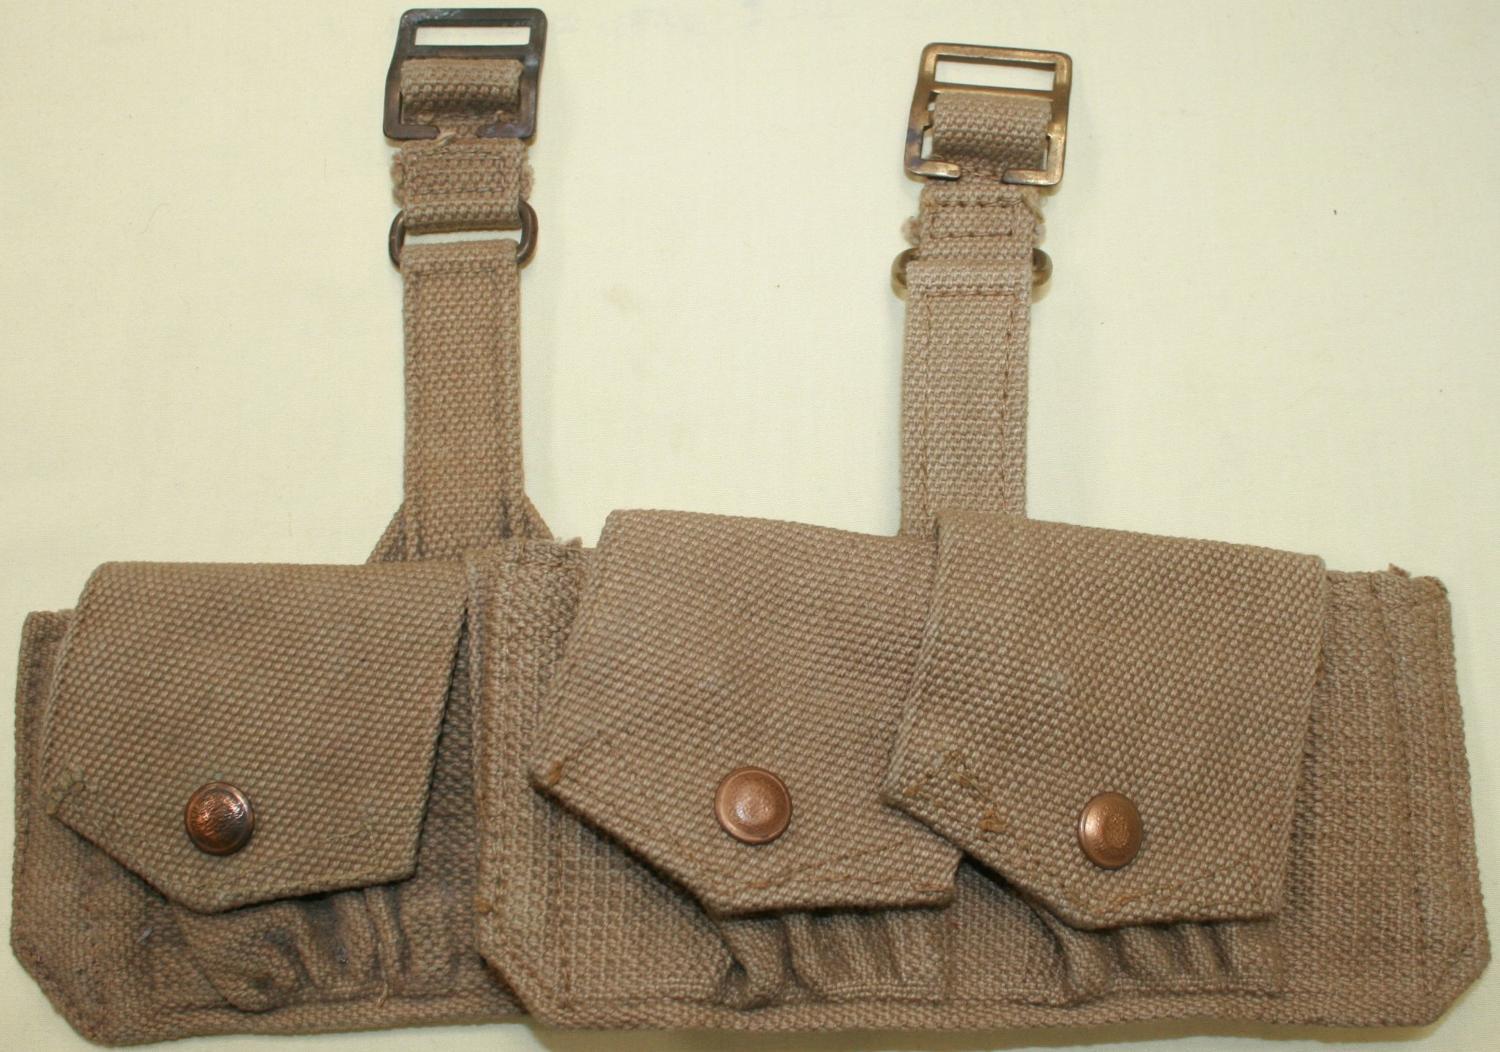 A PAIR OF THE SMALL DOUBLE AMMO POUCHES